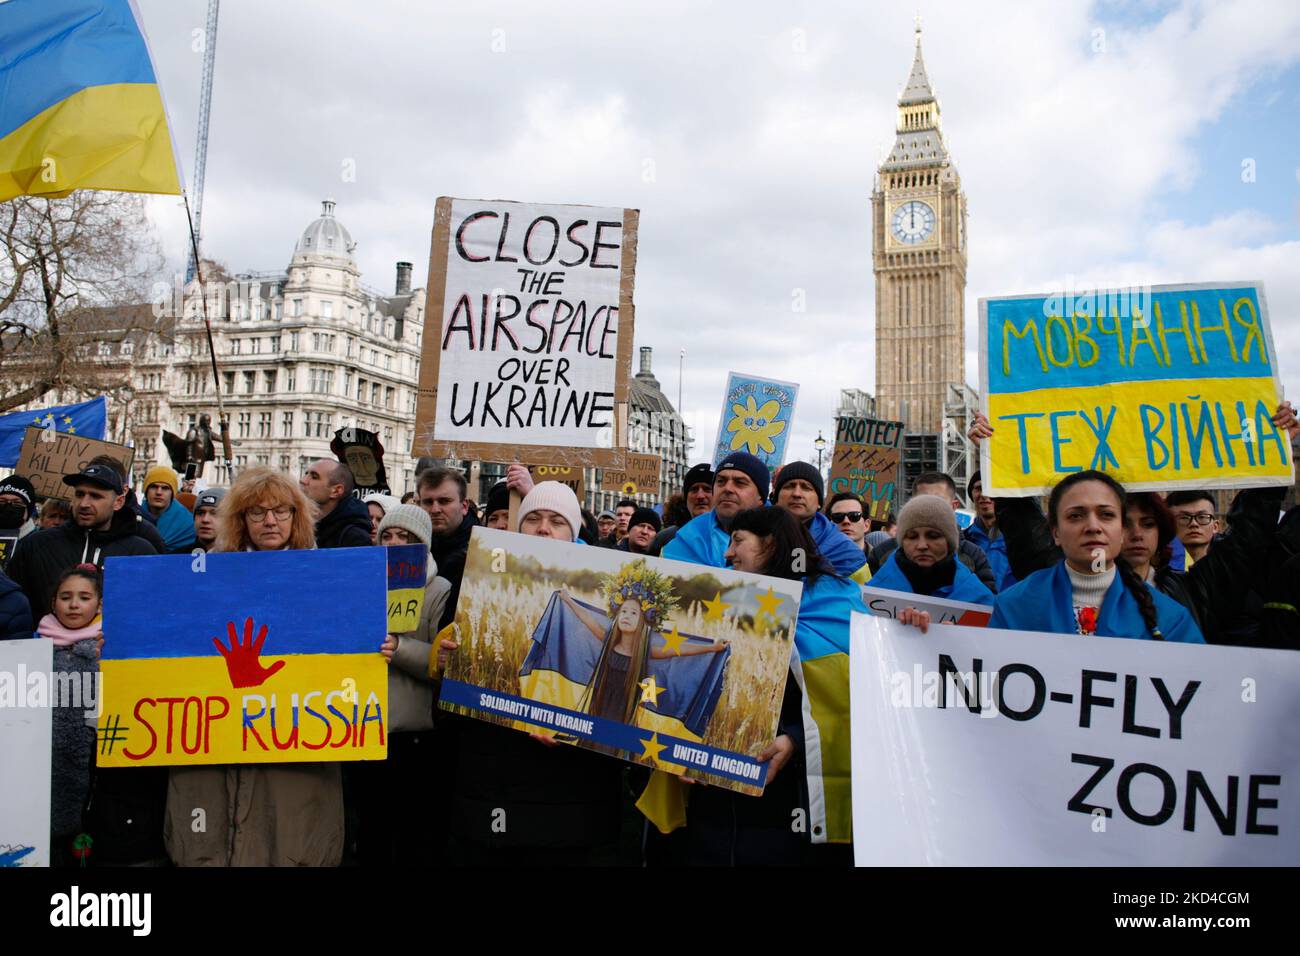 Pro-Ukraine activists protesting against the Russian invasion of the country demonstrate outside the Houses of Parliament in Parliament Square in London, England, on March 6, 2022. (Photo by David Cliff/NurPhoto) Stock Photo